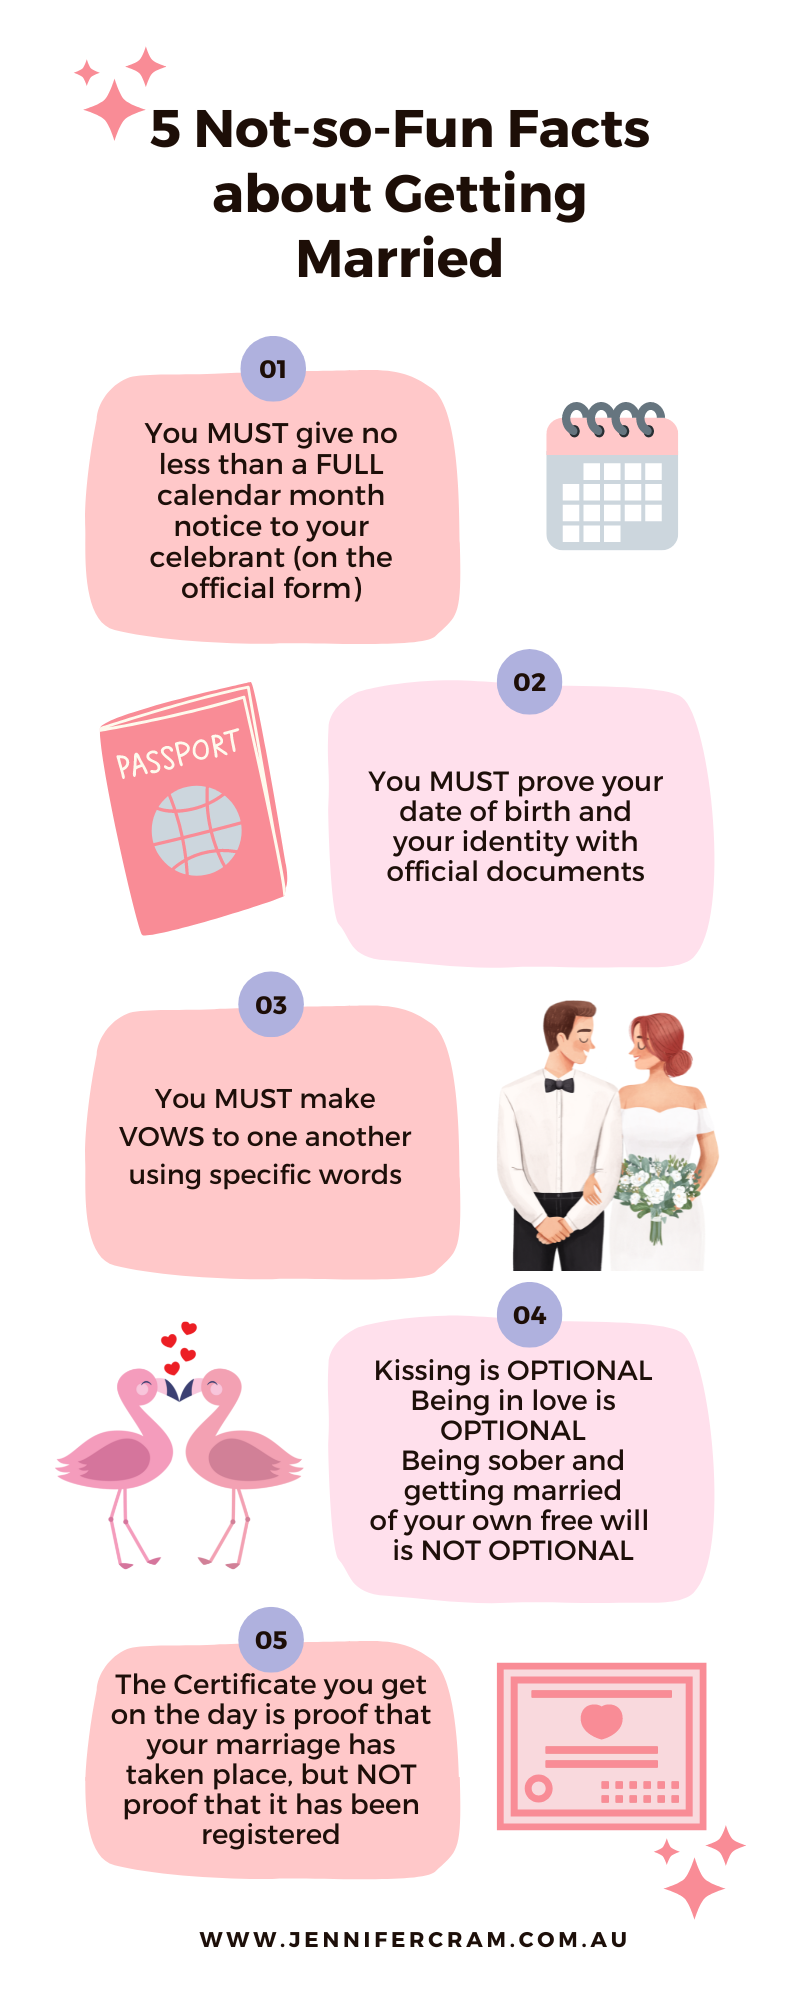 5 Not-so-Fun
                        Facts about getting married in Australia